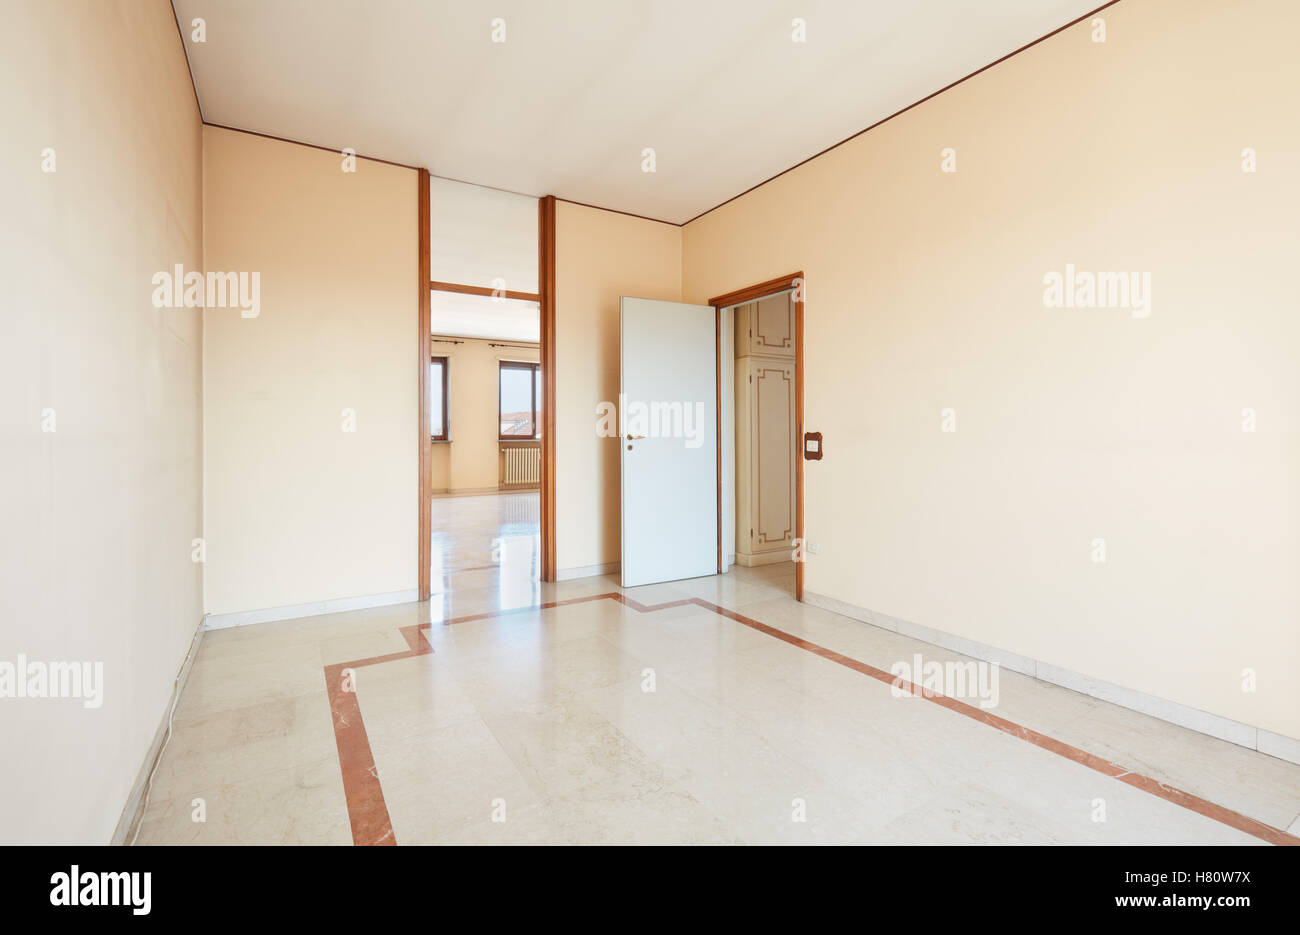 Large empty room interior with marble floor Stock Photo